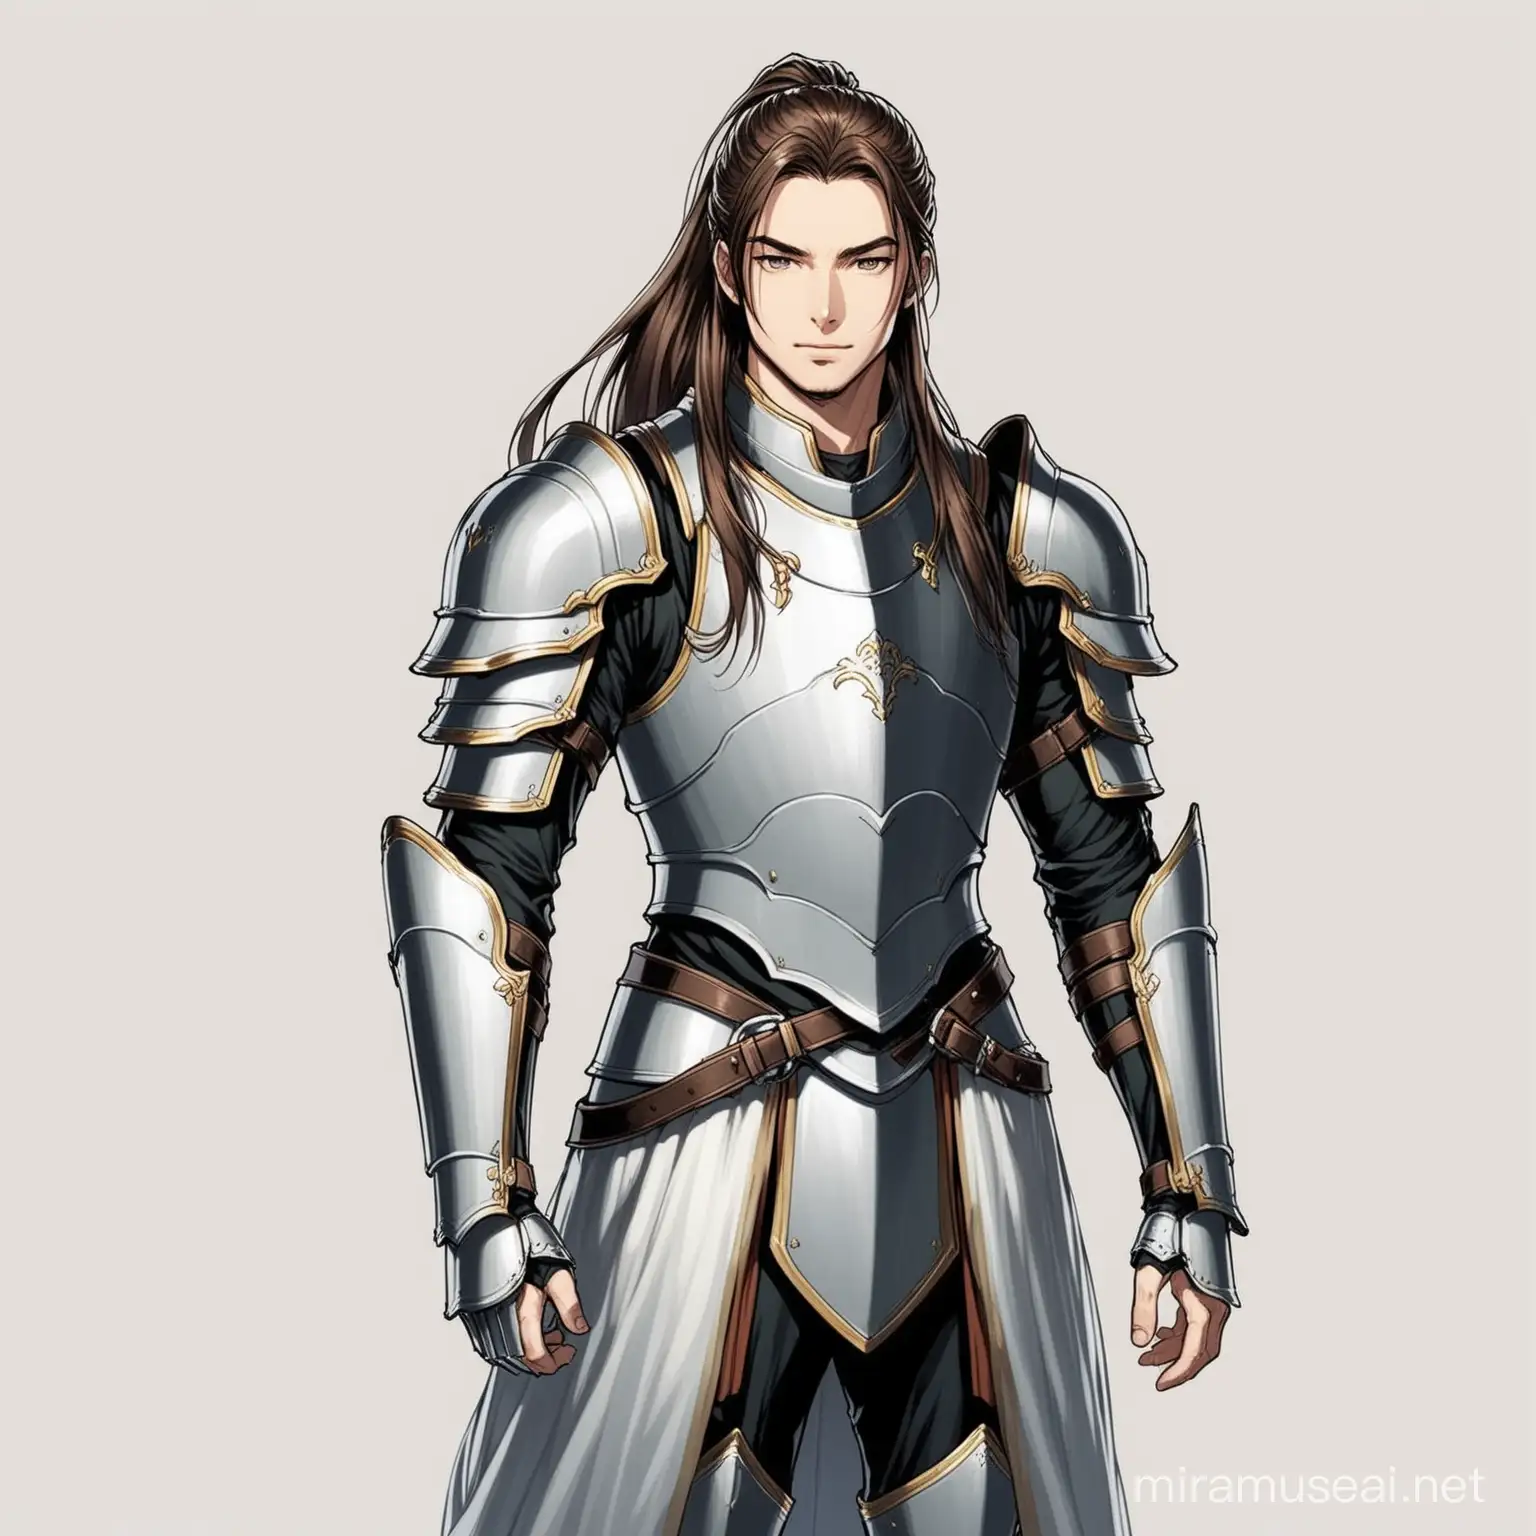 Male, long hair in a ponytail, light armour